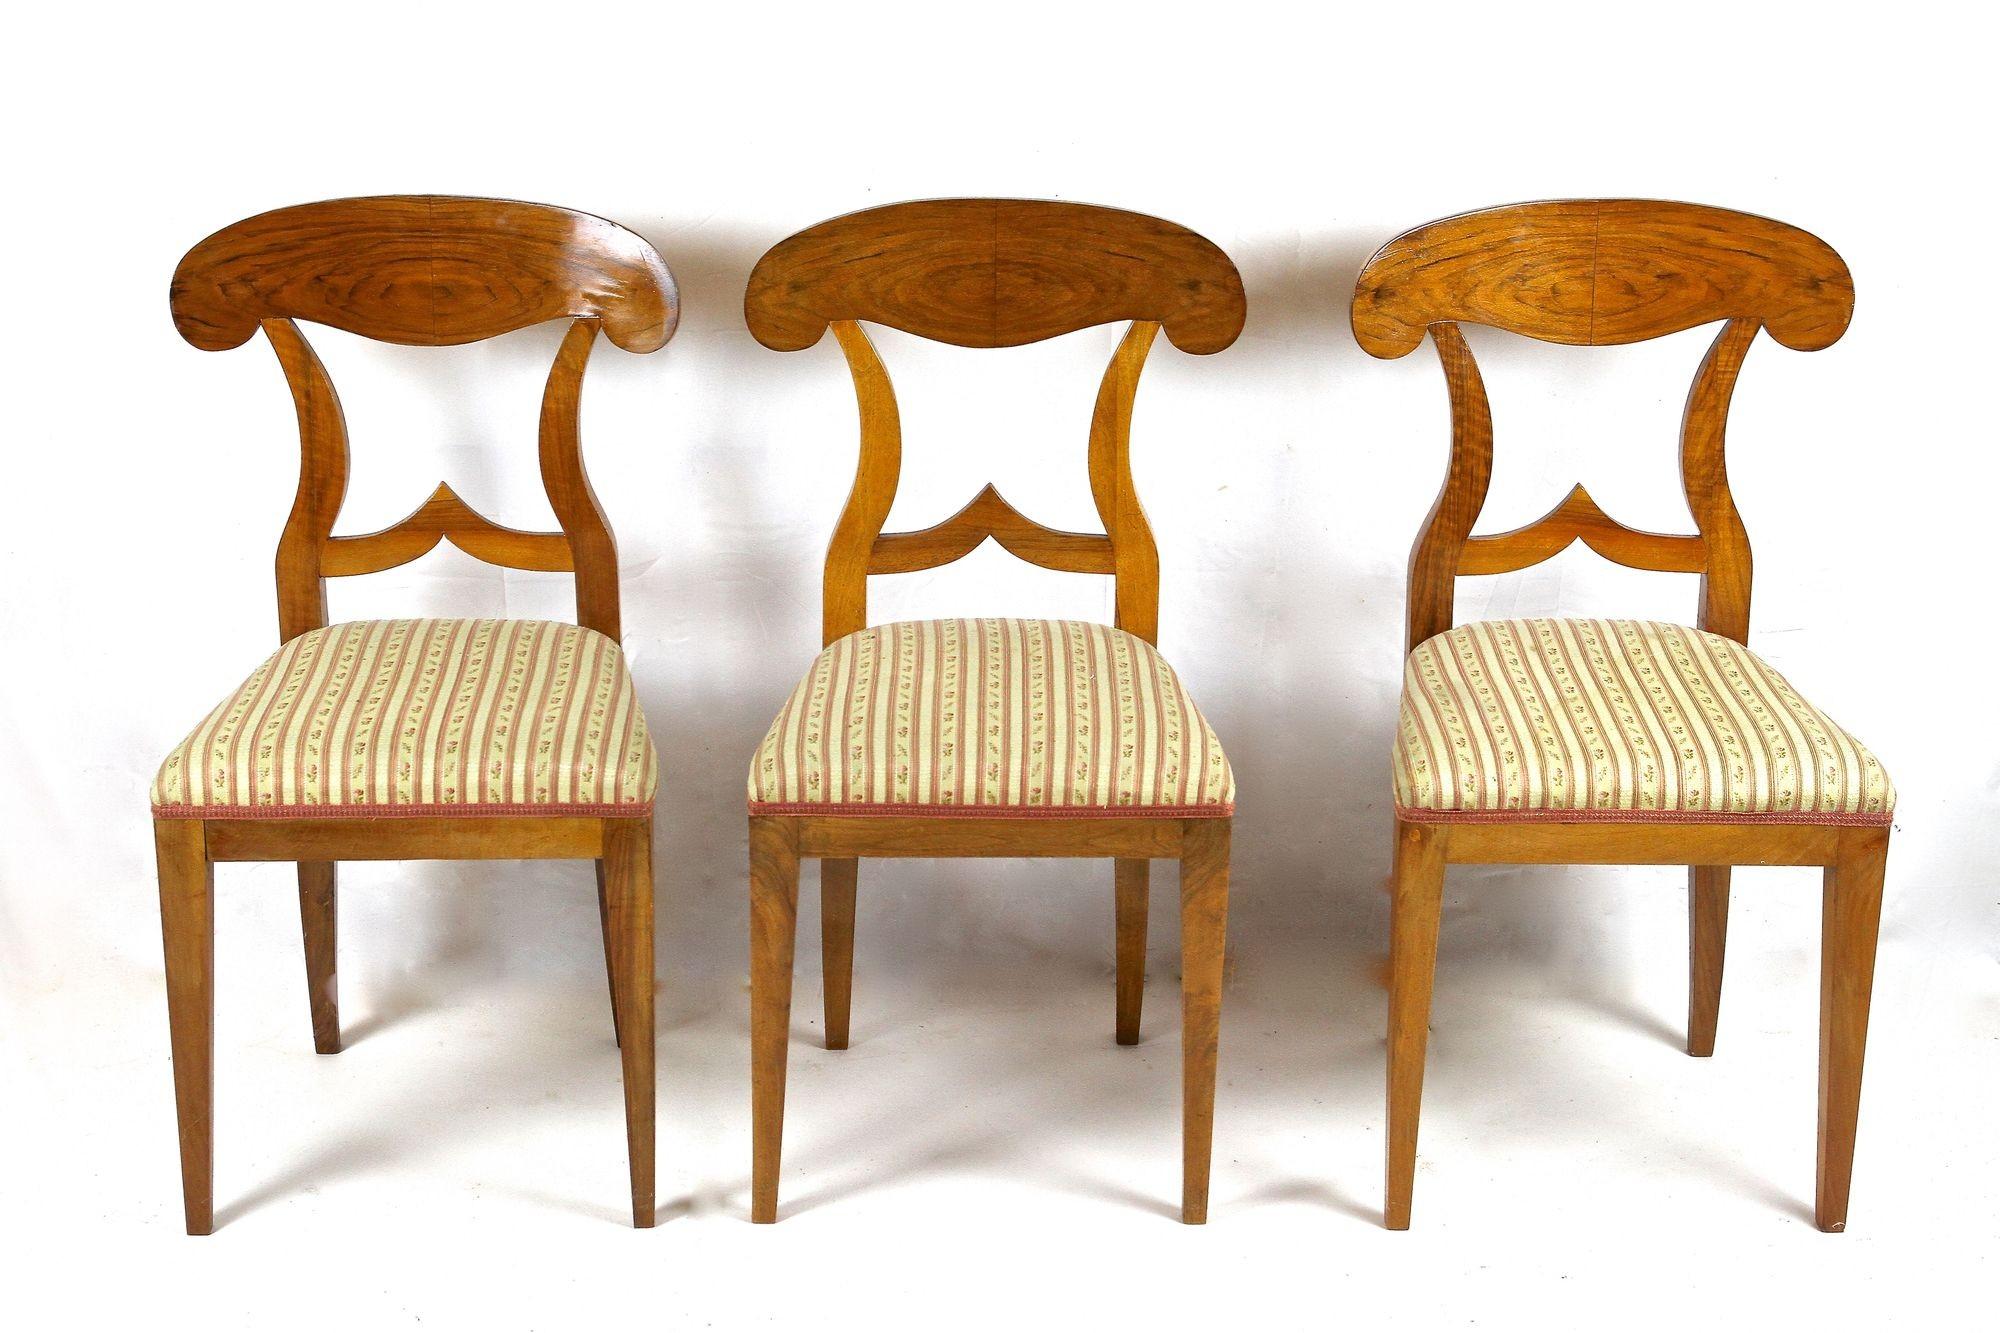 Set Of 6 Biedermeier Nutwood Shovel Dining Chairs, 19th Century, AT ca. 1830 For Sale 4